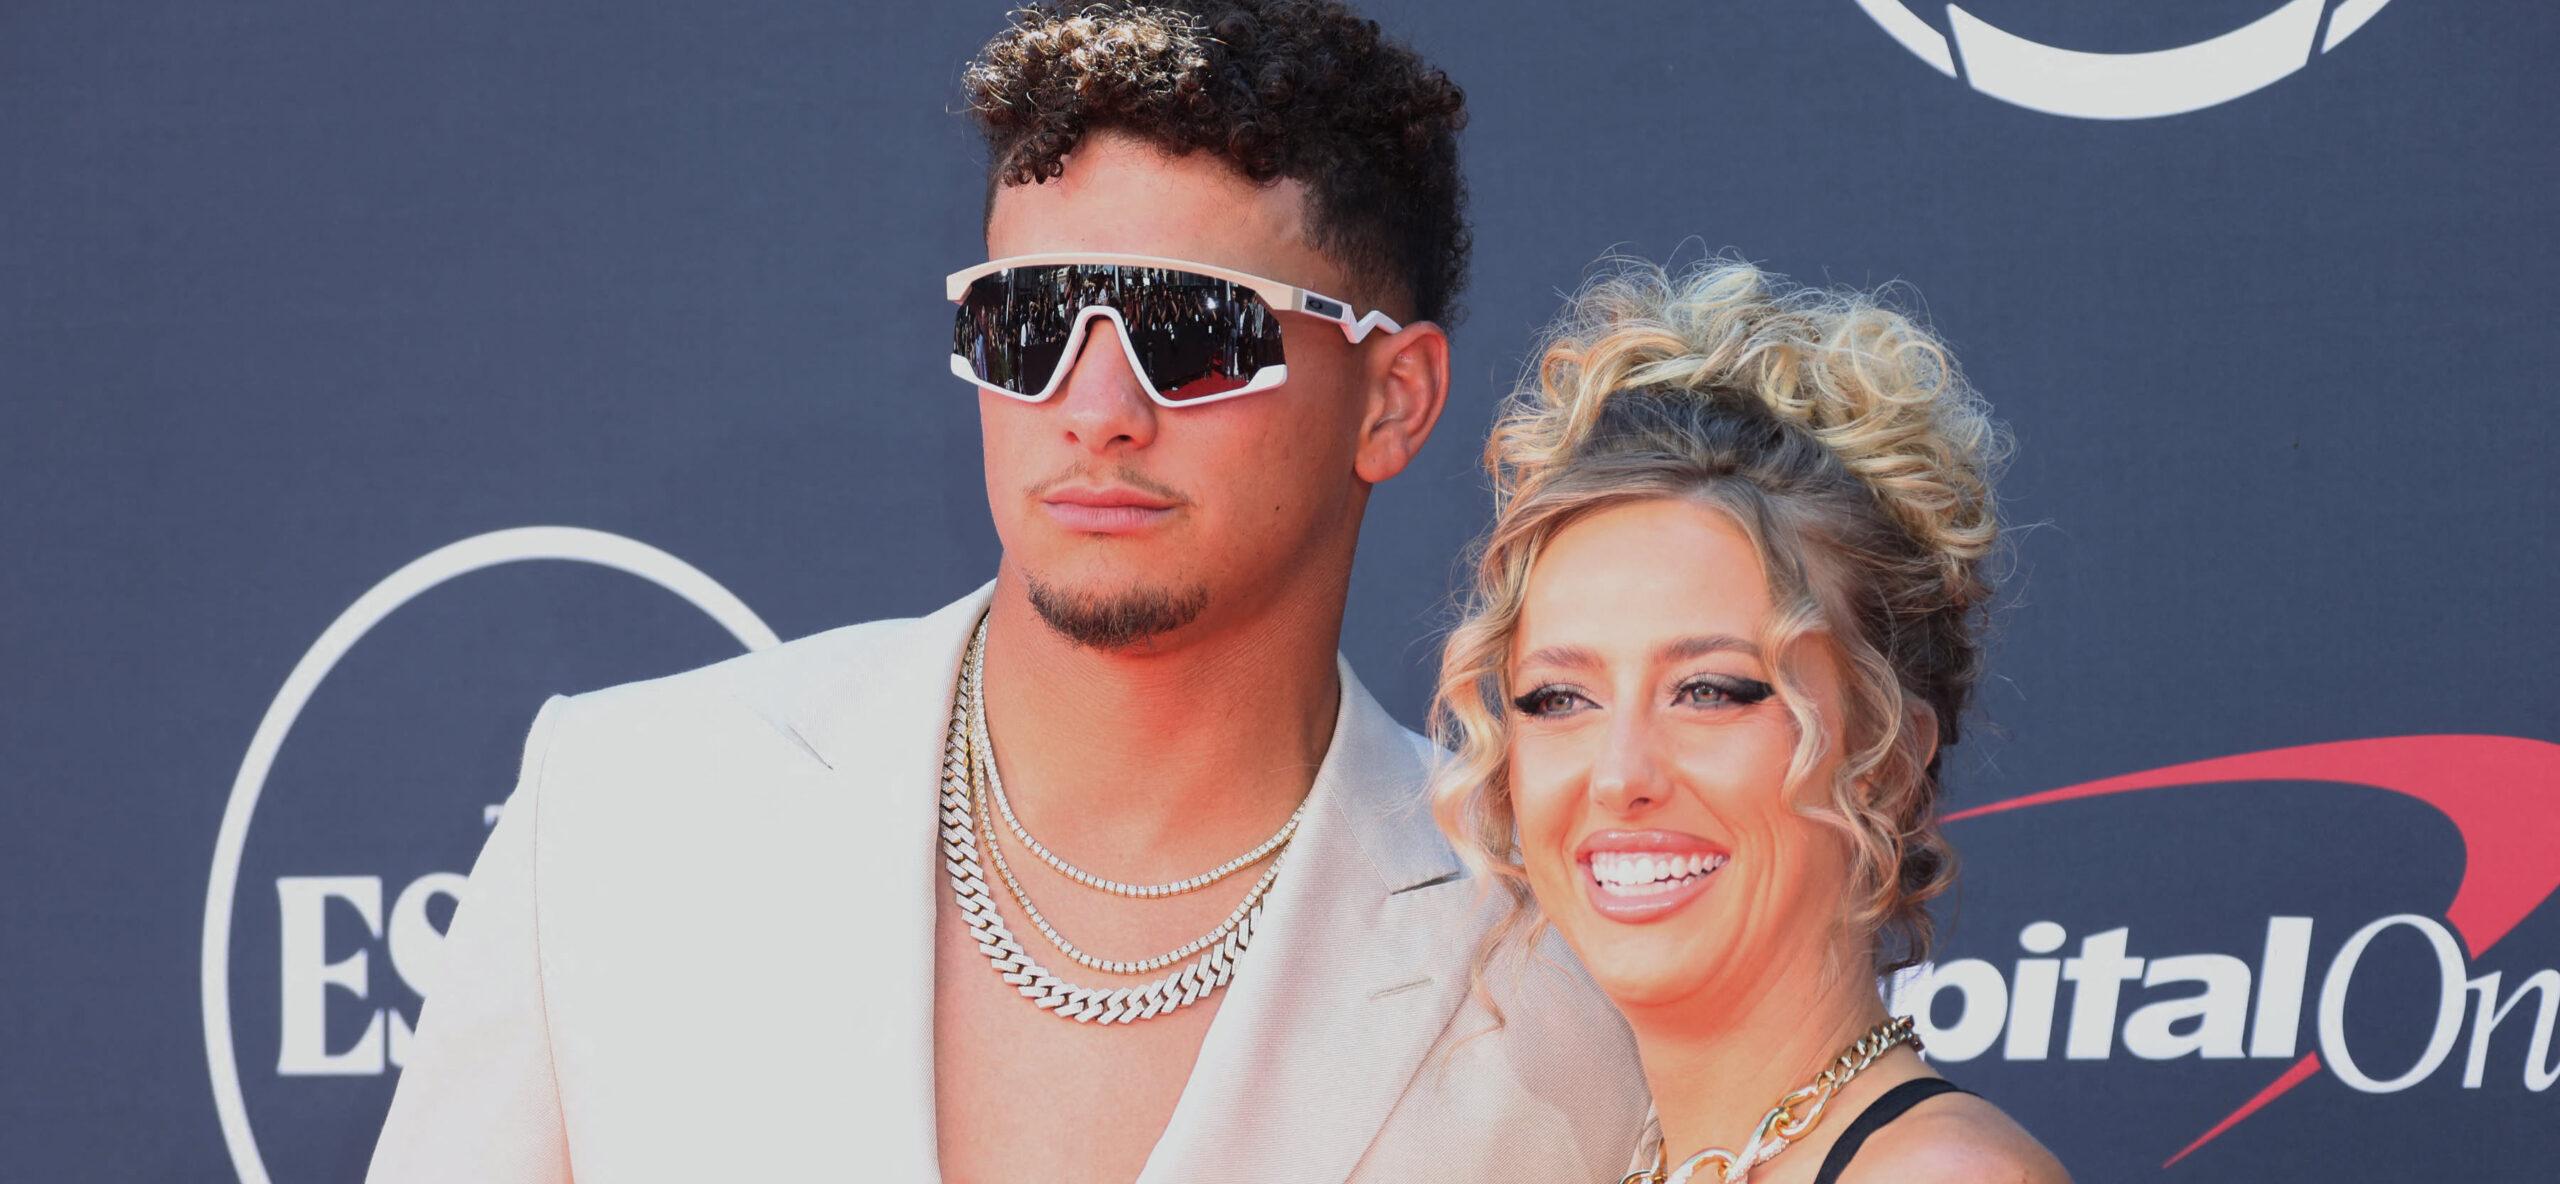 Brittany Mahomes Reveals Why Her 1-Year-Old Son Was Rushed To E.R.